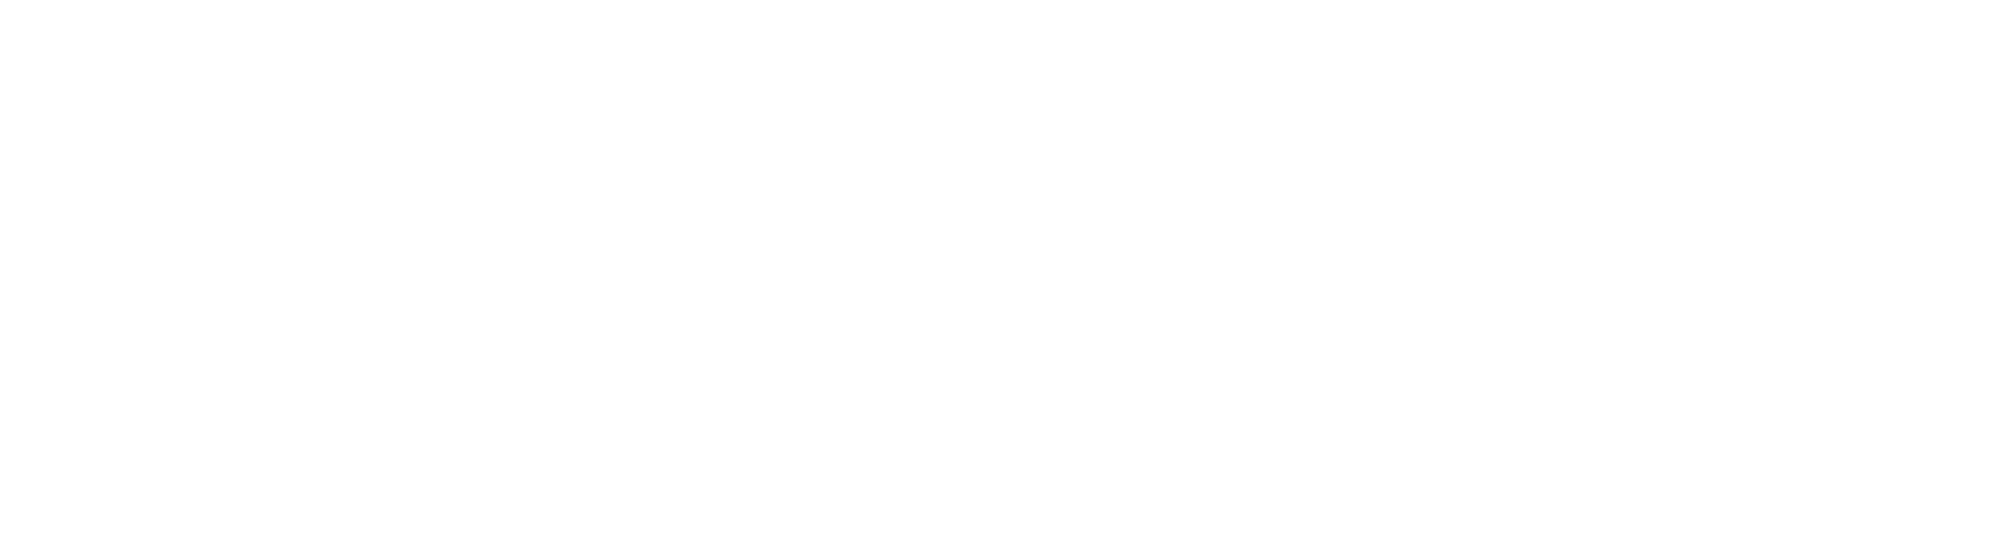 small business administration logo